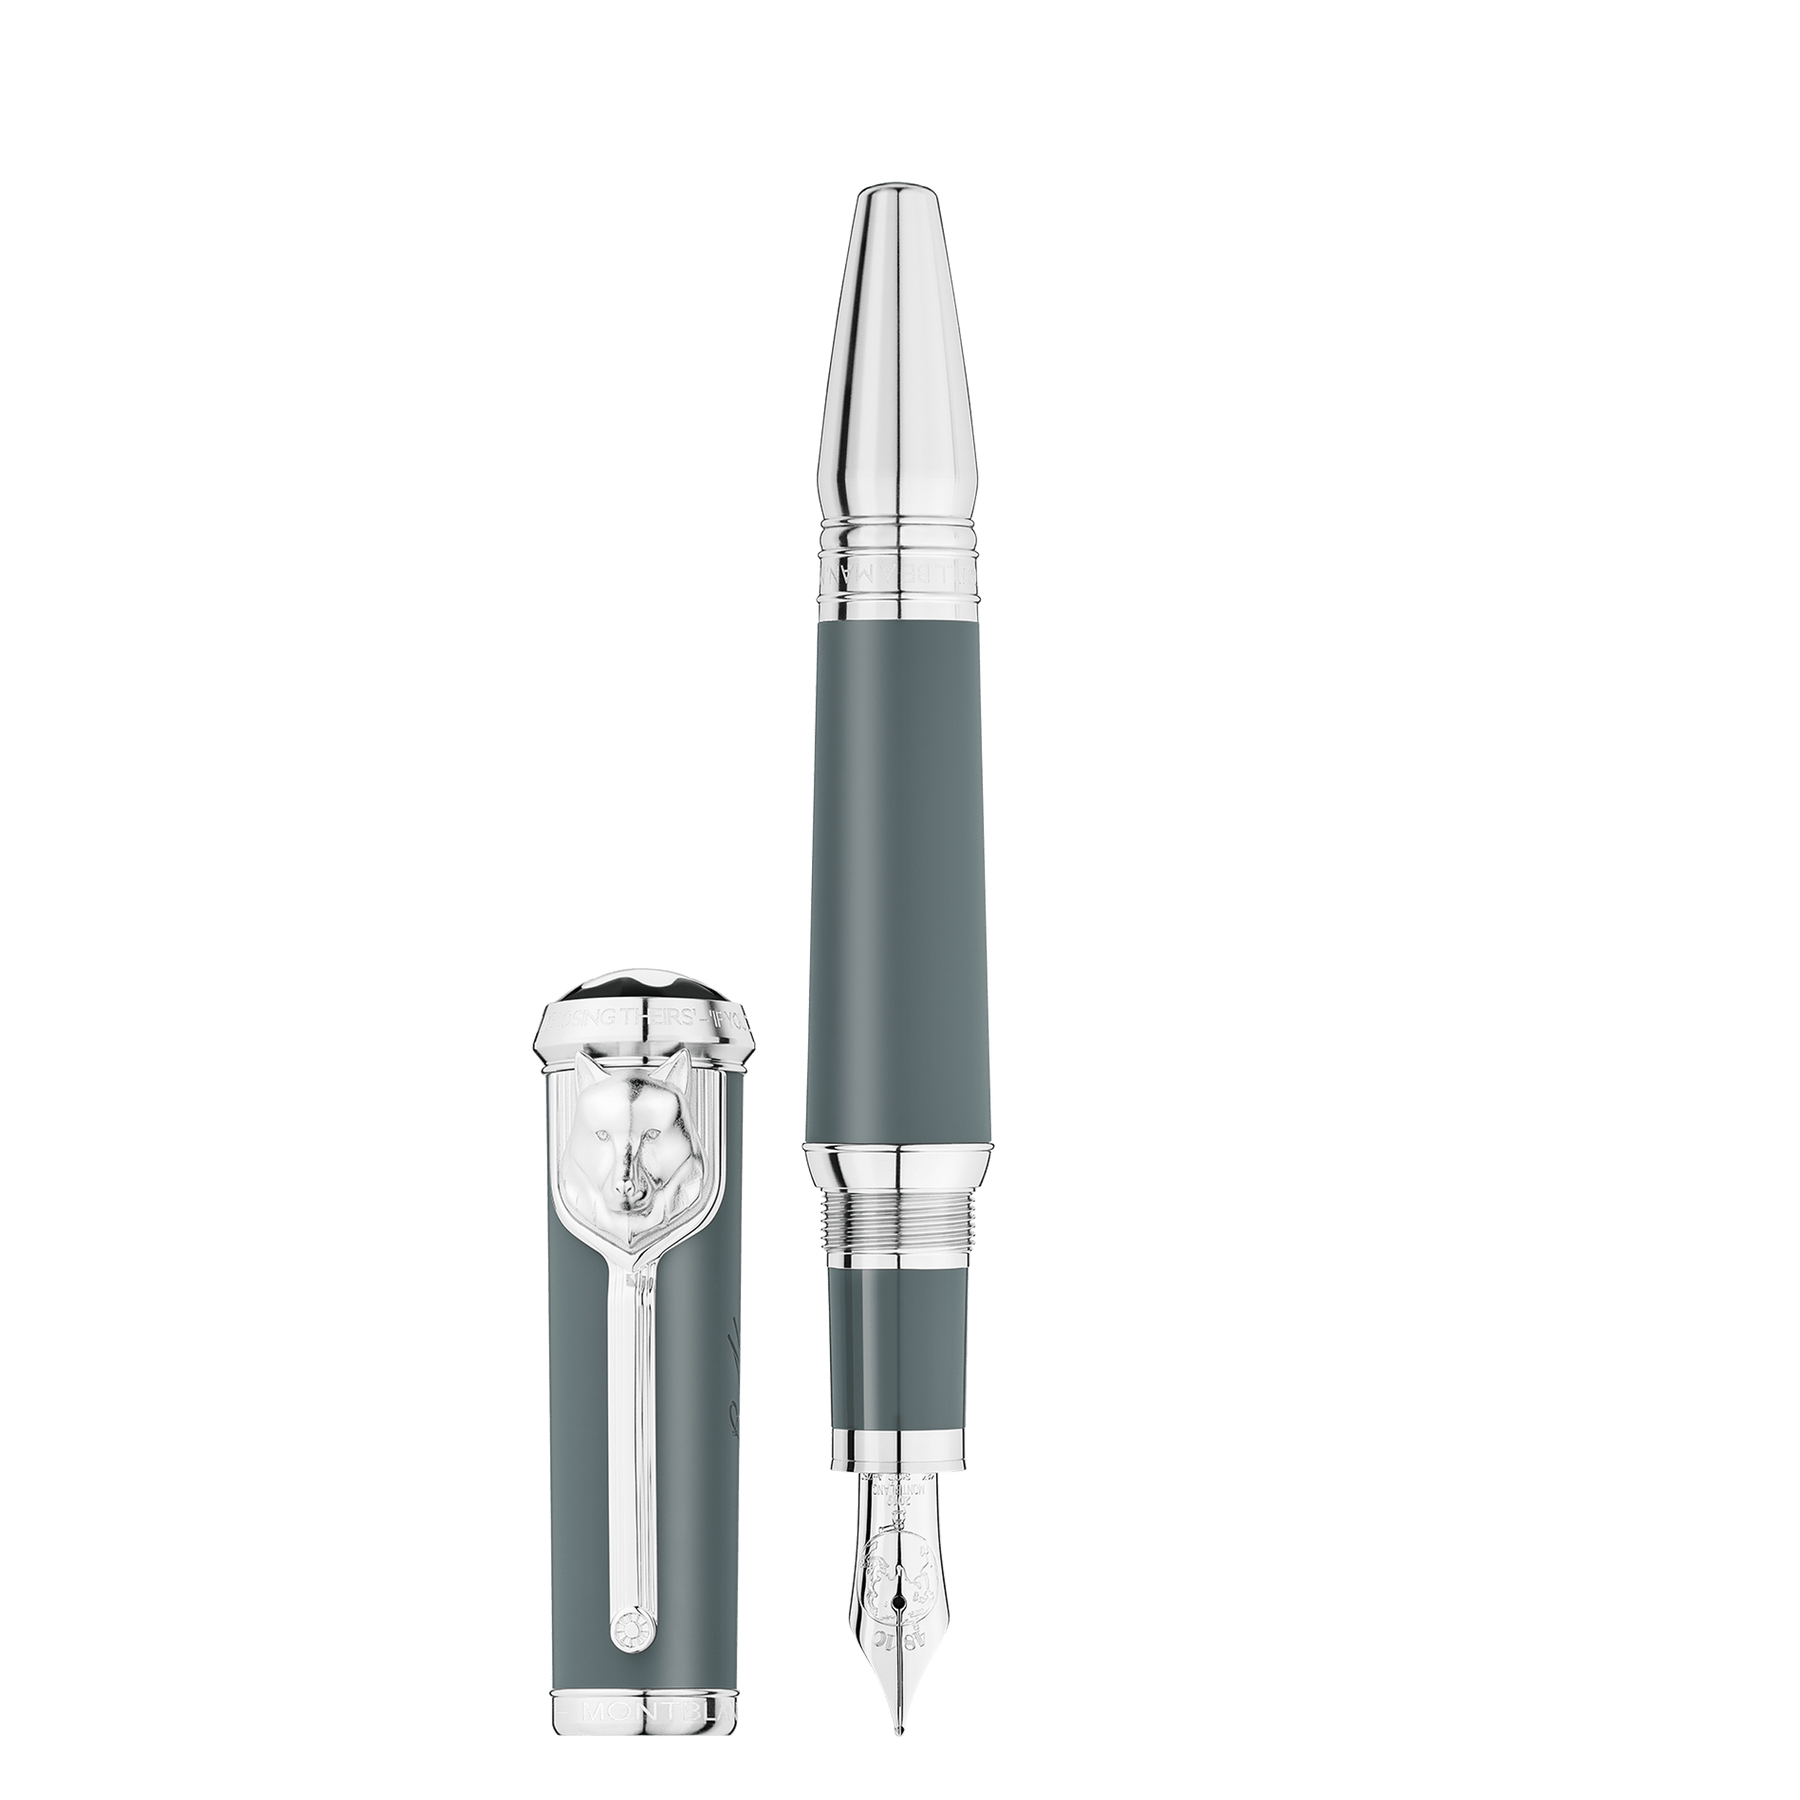 Writers Edition Homage to Rudyard Kipling Limited Edition Fountain Pen